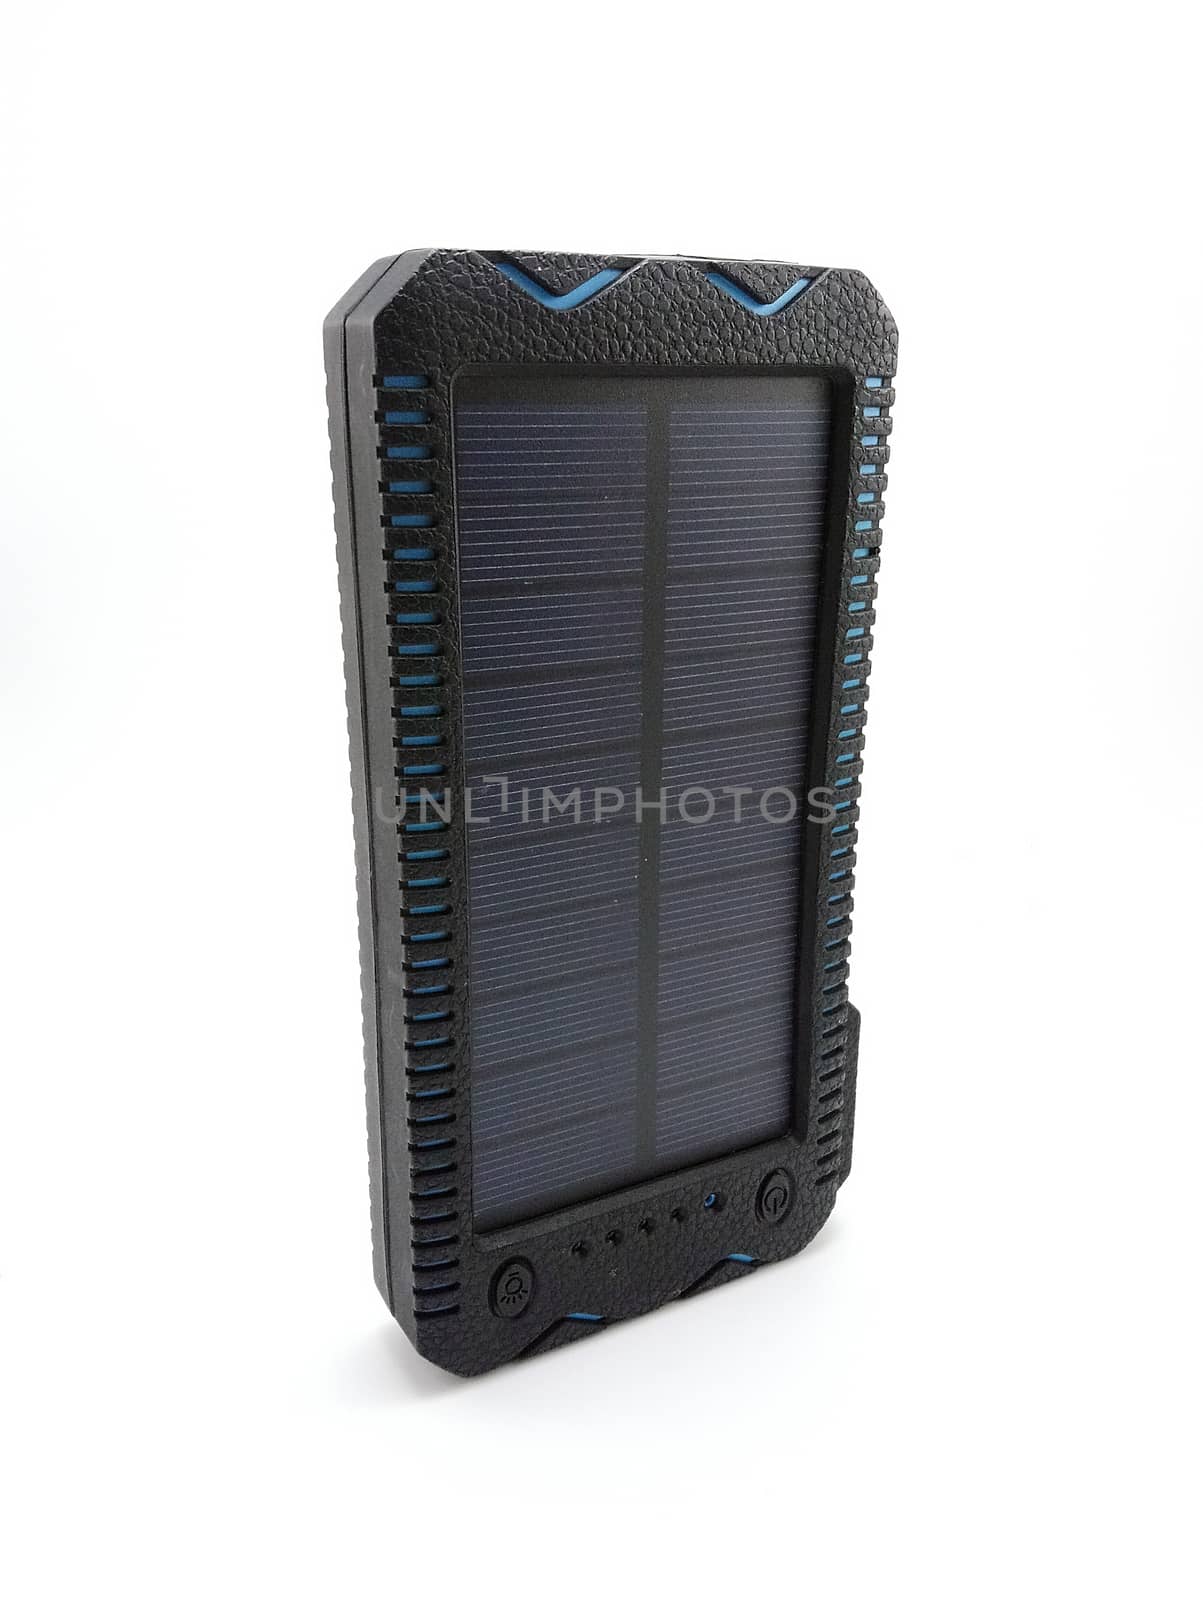 Solar power powerbank charger use to charge low to empty battery of smartphone